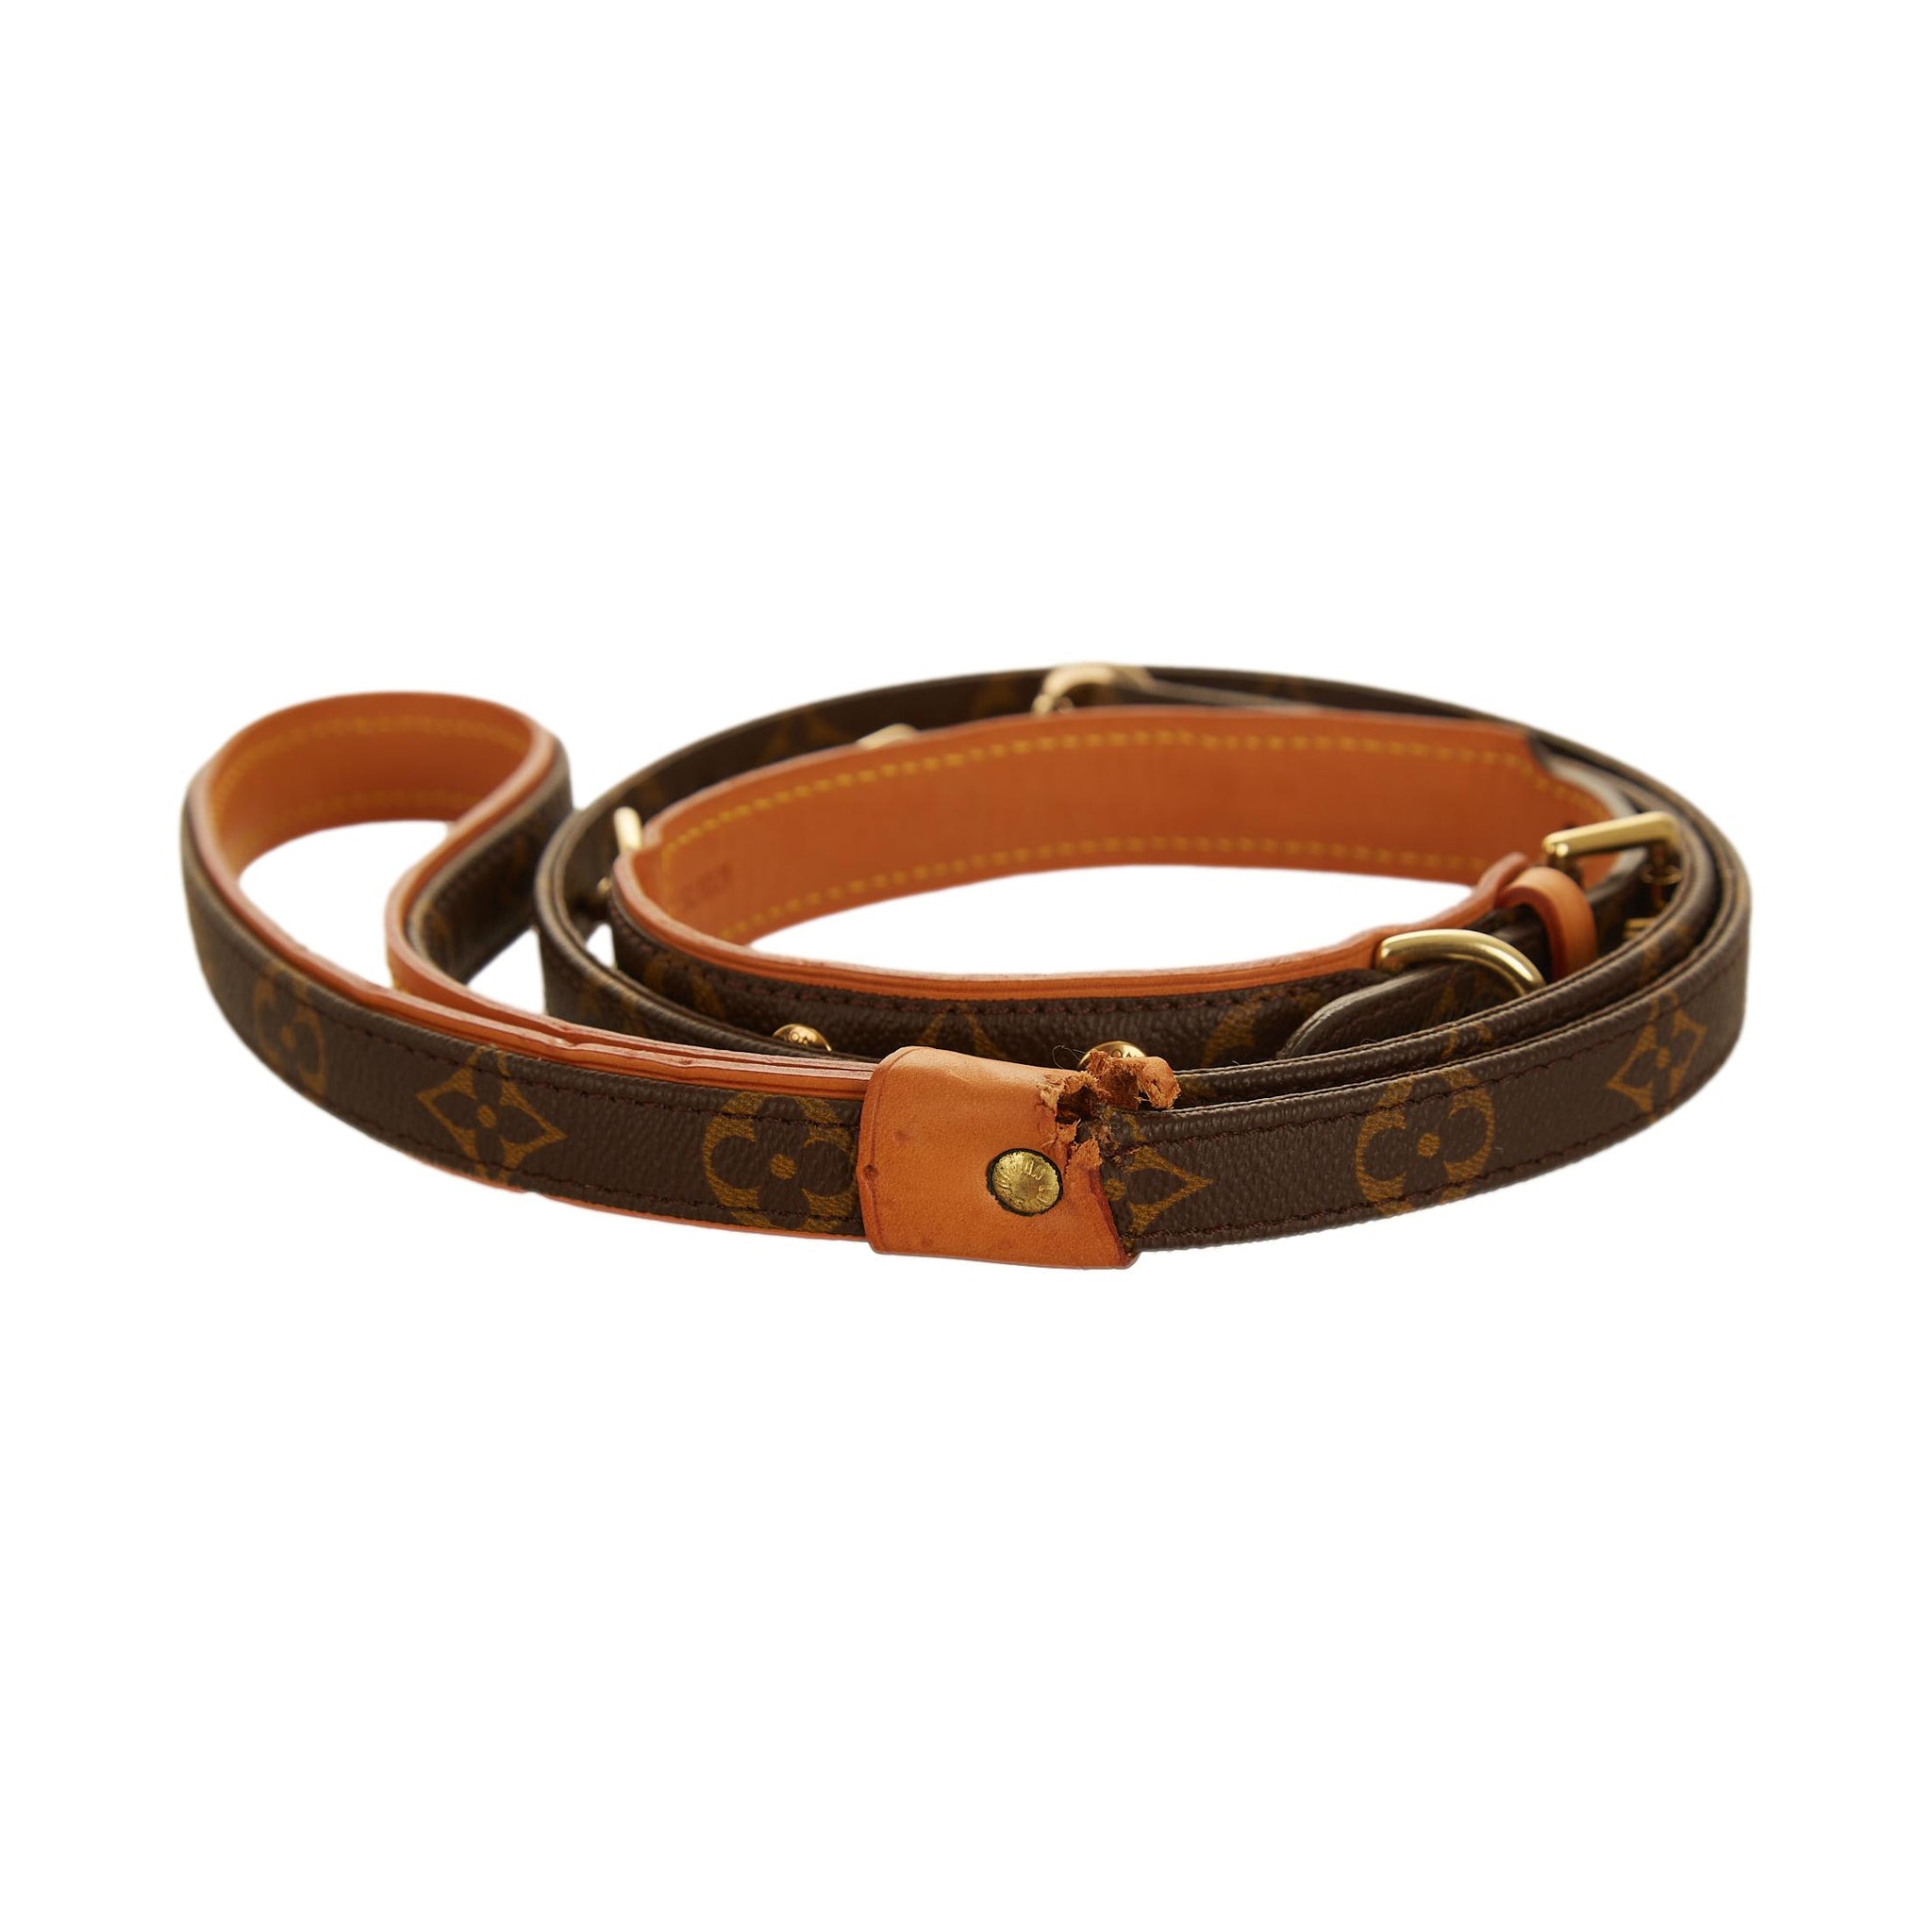 Louis Vuitton Dog Collar and Leash 